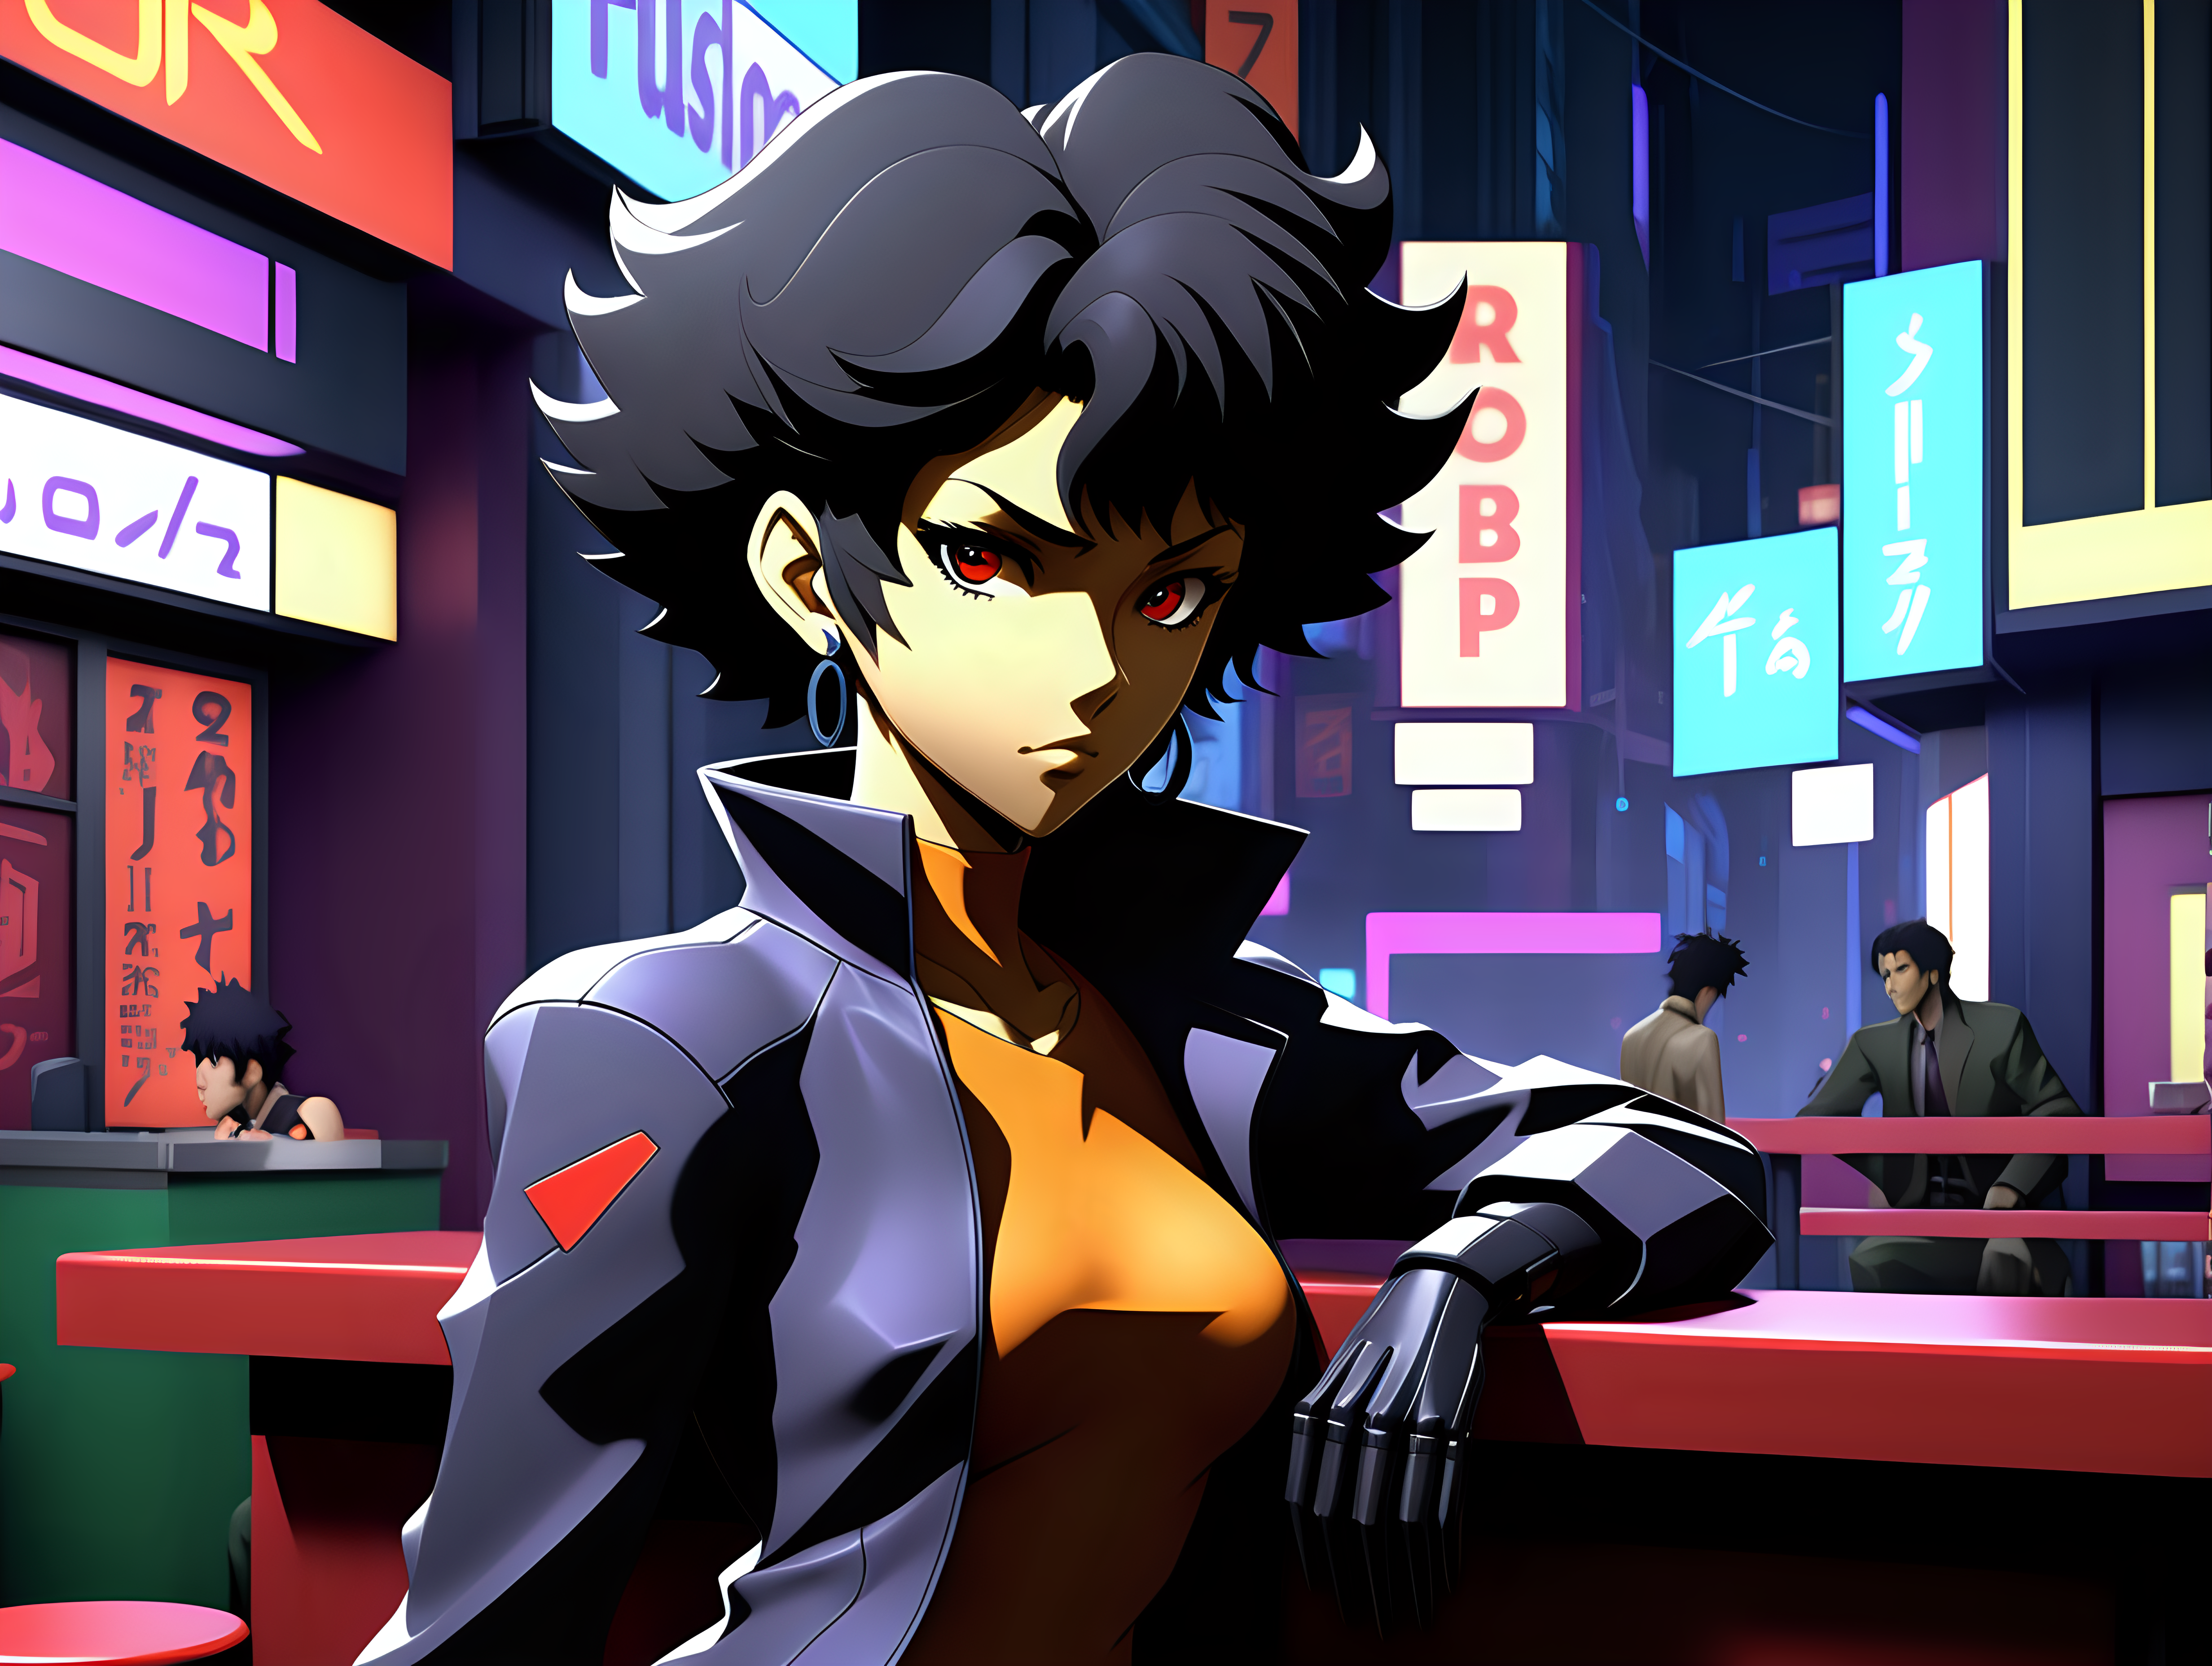 Generate concept art for a JRPG with a jazz-infused soundtrack and an aesthetic inspired by Persona, Cowboy Bebop, and Akira. The scene should prominently feature a main woman character in the front, along with supporting characters, in a vibrant urban environment, specifically in a futuristic bar or nightclub with elements of futuristic technology and a touch of noir.

Incorporate smooth low-poly graphics reminiscent of the PS1 era, capturing the essence of classic JRPGs. The art style should draw inspiration from the stylish and dynamic visuals of Persona, the gritty cyberpunk atmosphere of Akira, and the jazzy, adventurous feel of Cowboy Bebop. Set the scene in a bustling city with neon lights, futuristic architecture, and a jazz club or district.

Highlight the main and supporting characters in a way that reflects their personalities and the overall tone of the game. The soundtrack should evoke the soulful and improvisational spirit of jazz, setting the mood for the JRPG adventure.

Embrace the fusion of futuristic technology, jazz influences, and the captivating aesthetics of Persona, Cowboy Bebop, and Akira, delivering a visually stunning and immersive concept for a JRPG with a futuristic bar or nightclub background, prominently featuring the main character in the front.